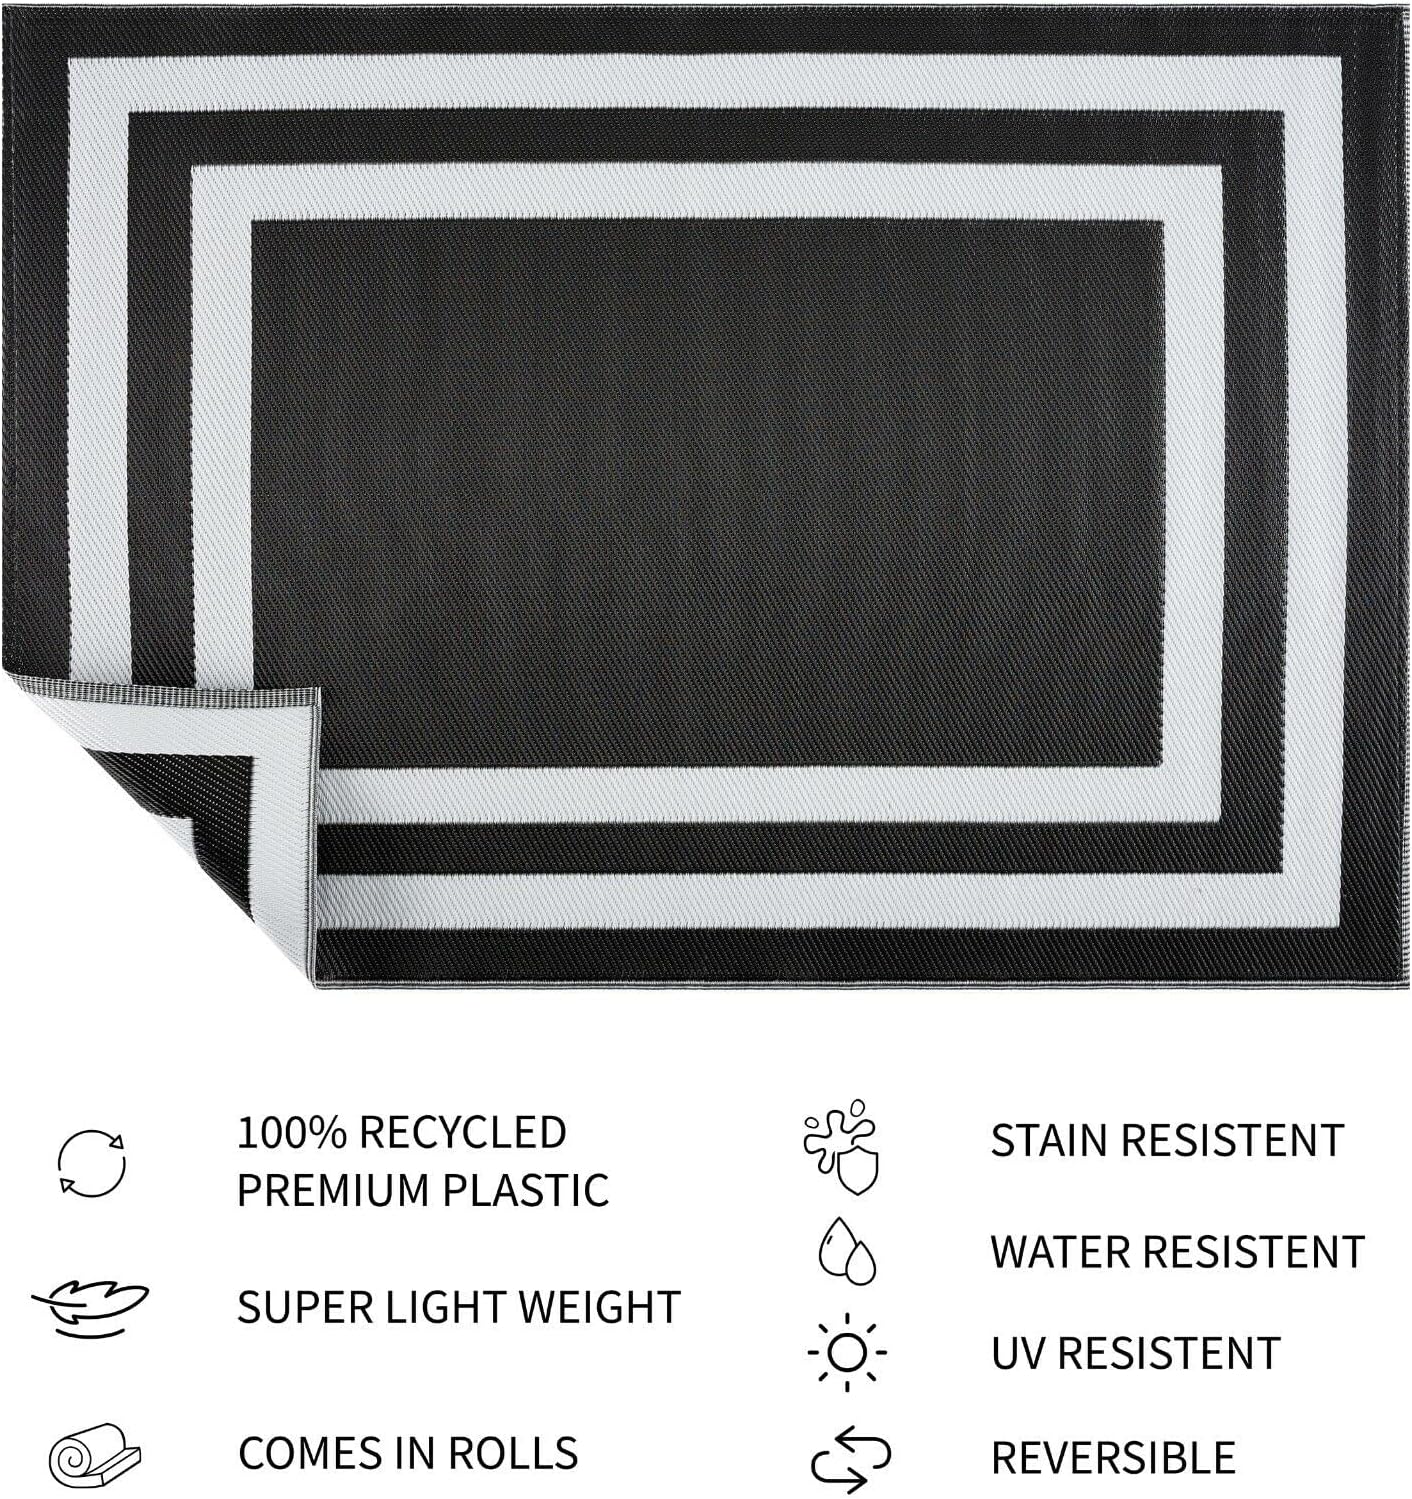 Playa Outdoor Rug - Crease-Free Recycled Plastic Floor Mat for Patio, Camping, Beach, Balcony, Porch, Deck - Weather, Water, Stain, Lightweight, Fade and UV Resistant - Paris- Black & White